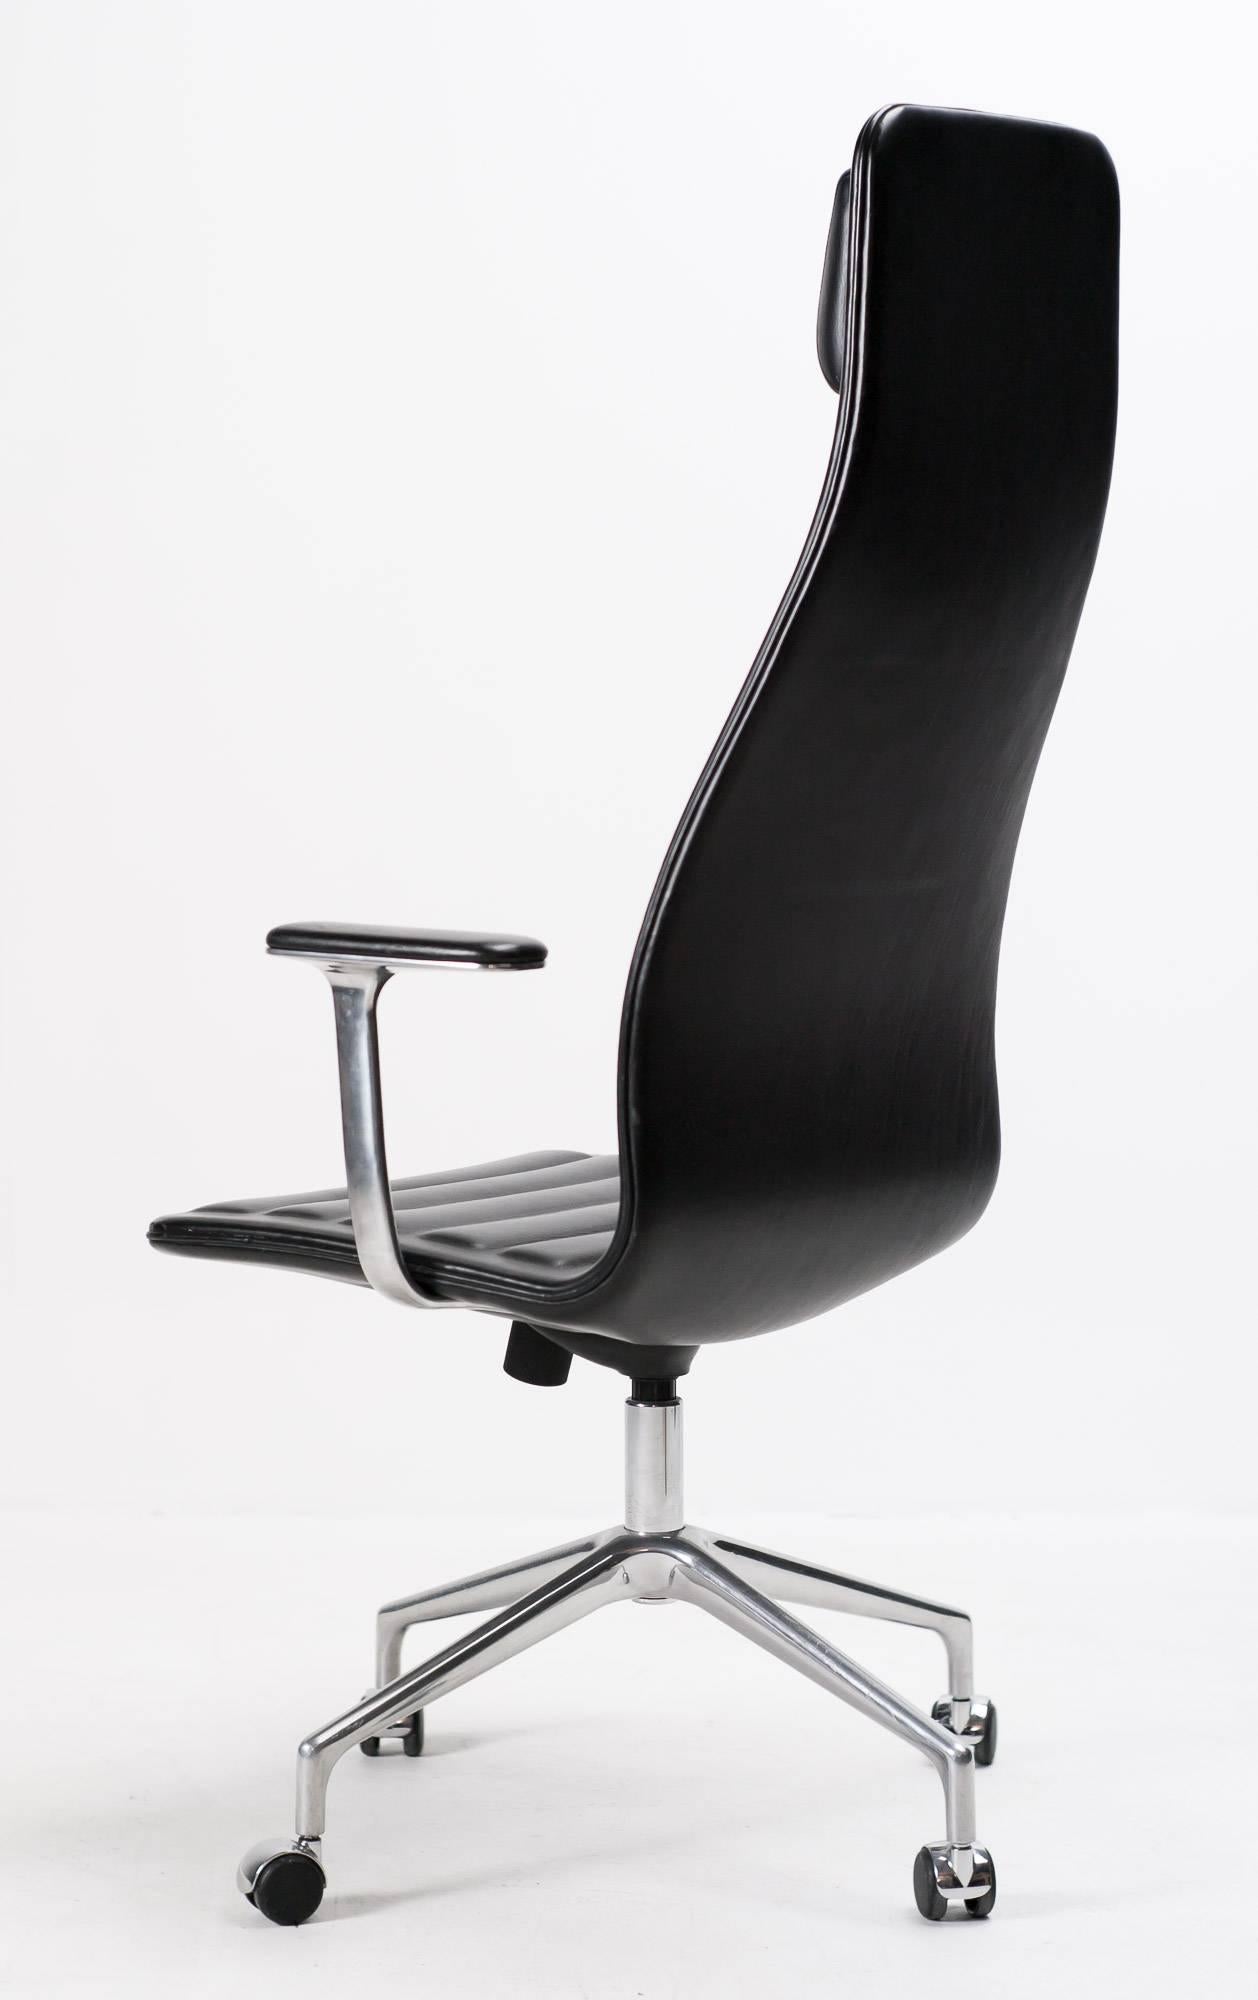 High Lotus desk chair designed by Jasper Morrison for Cappellini. Moulded black leather upholstered meeting chair. Swivel, height adjustable, tilt adjustable and chromed cast aluminium base. Removable magnetically attached head cushion. First